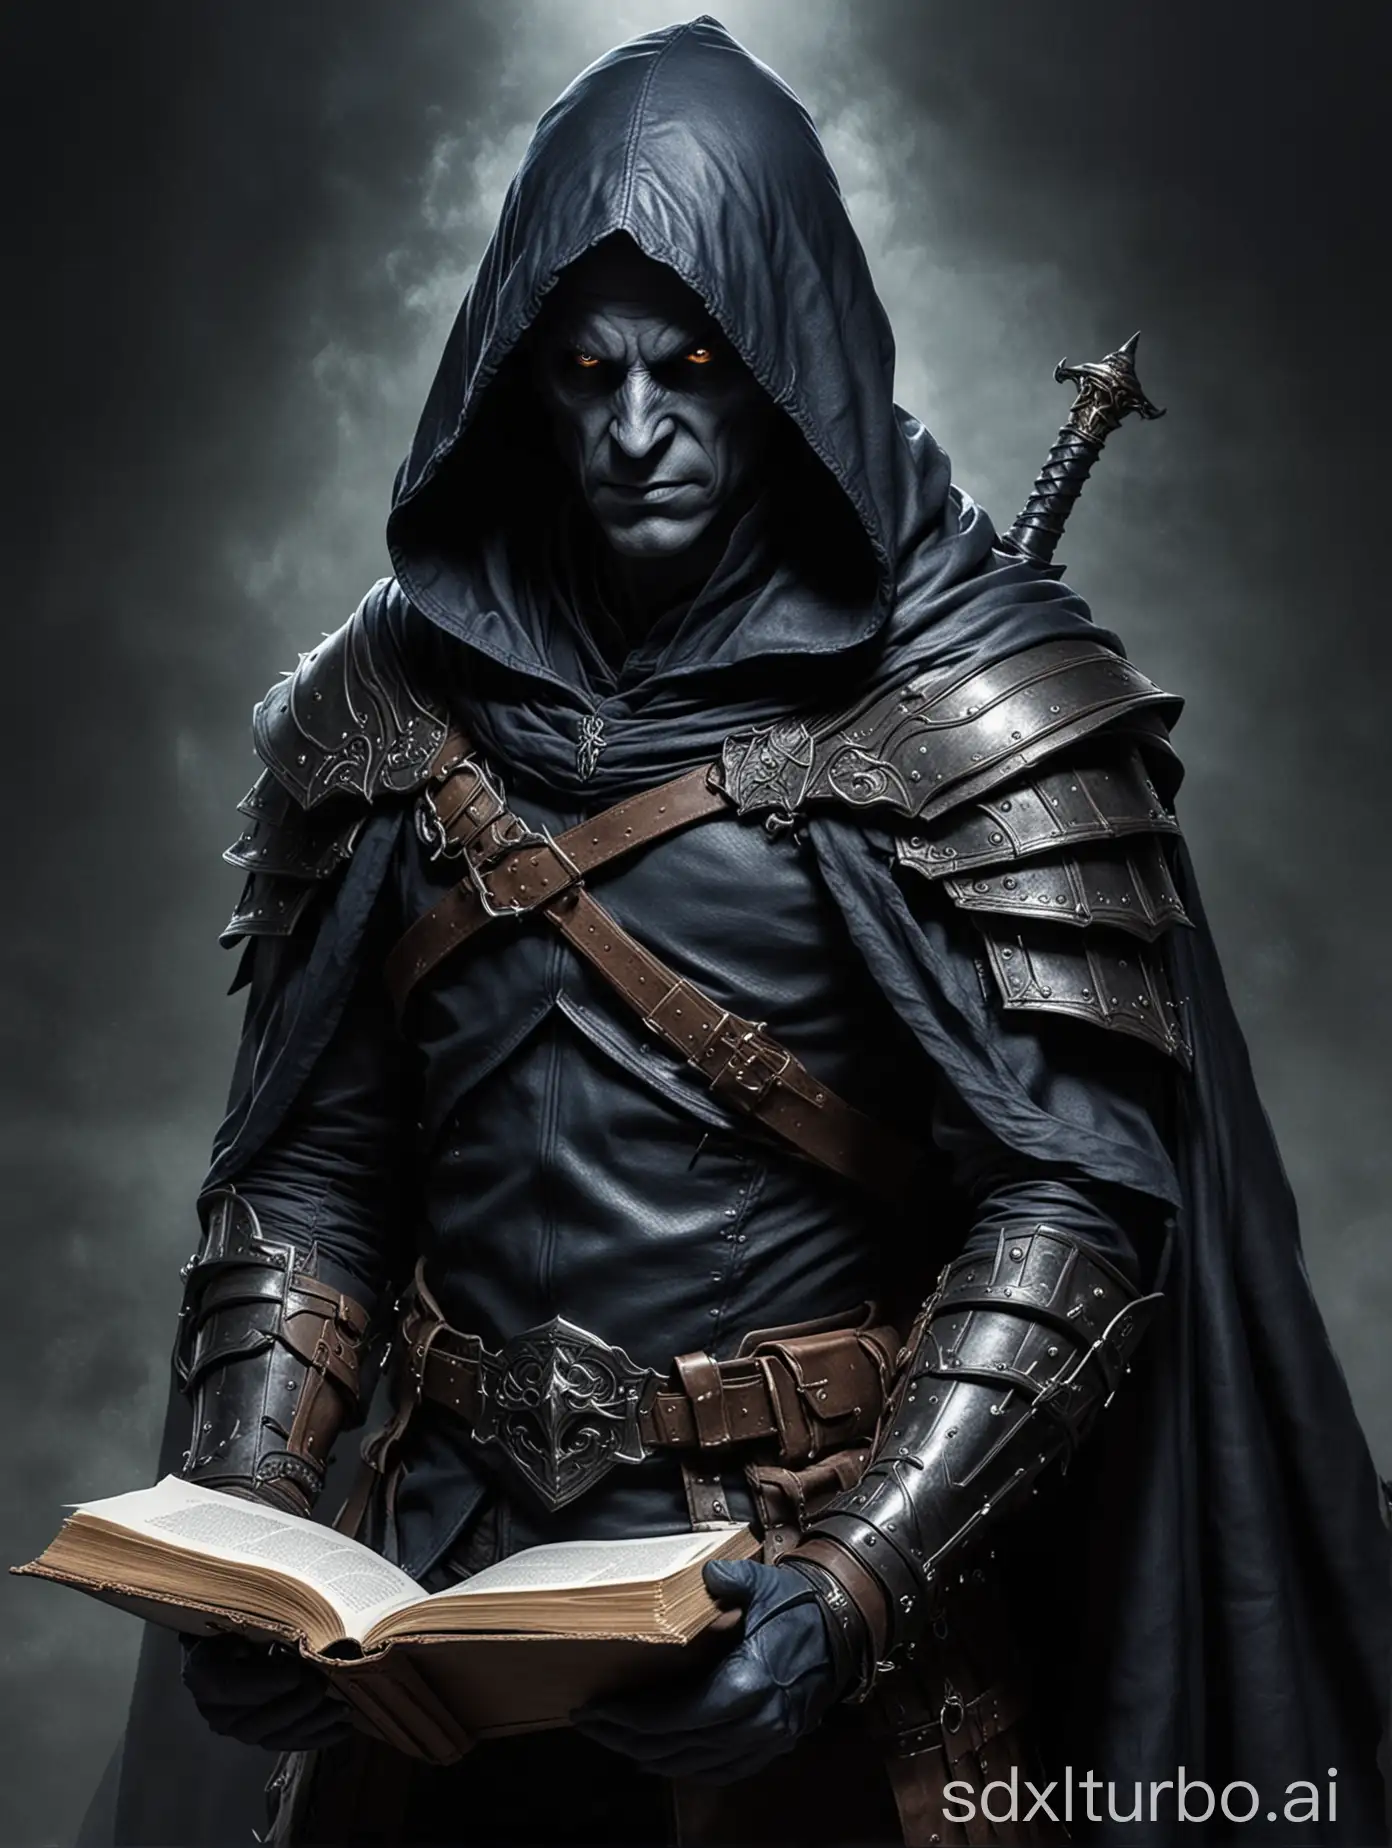 Evil Dark elf, aging, dark blue skin, leather armor, hood, and cape with a sword on his back. Reading a book